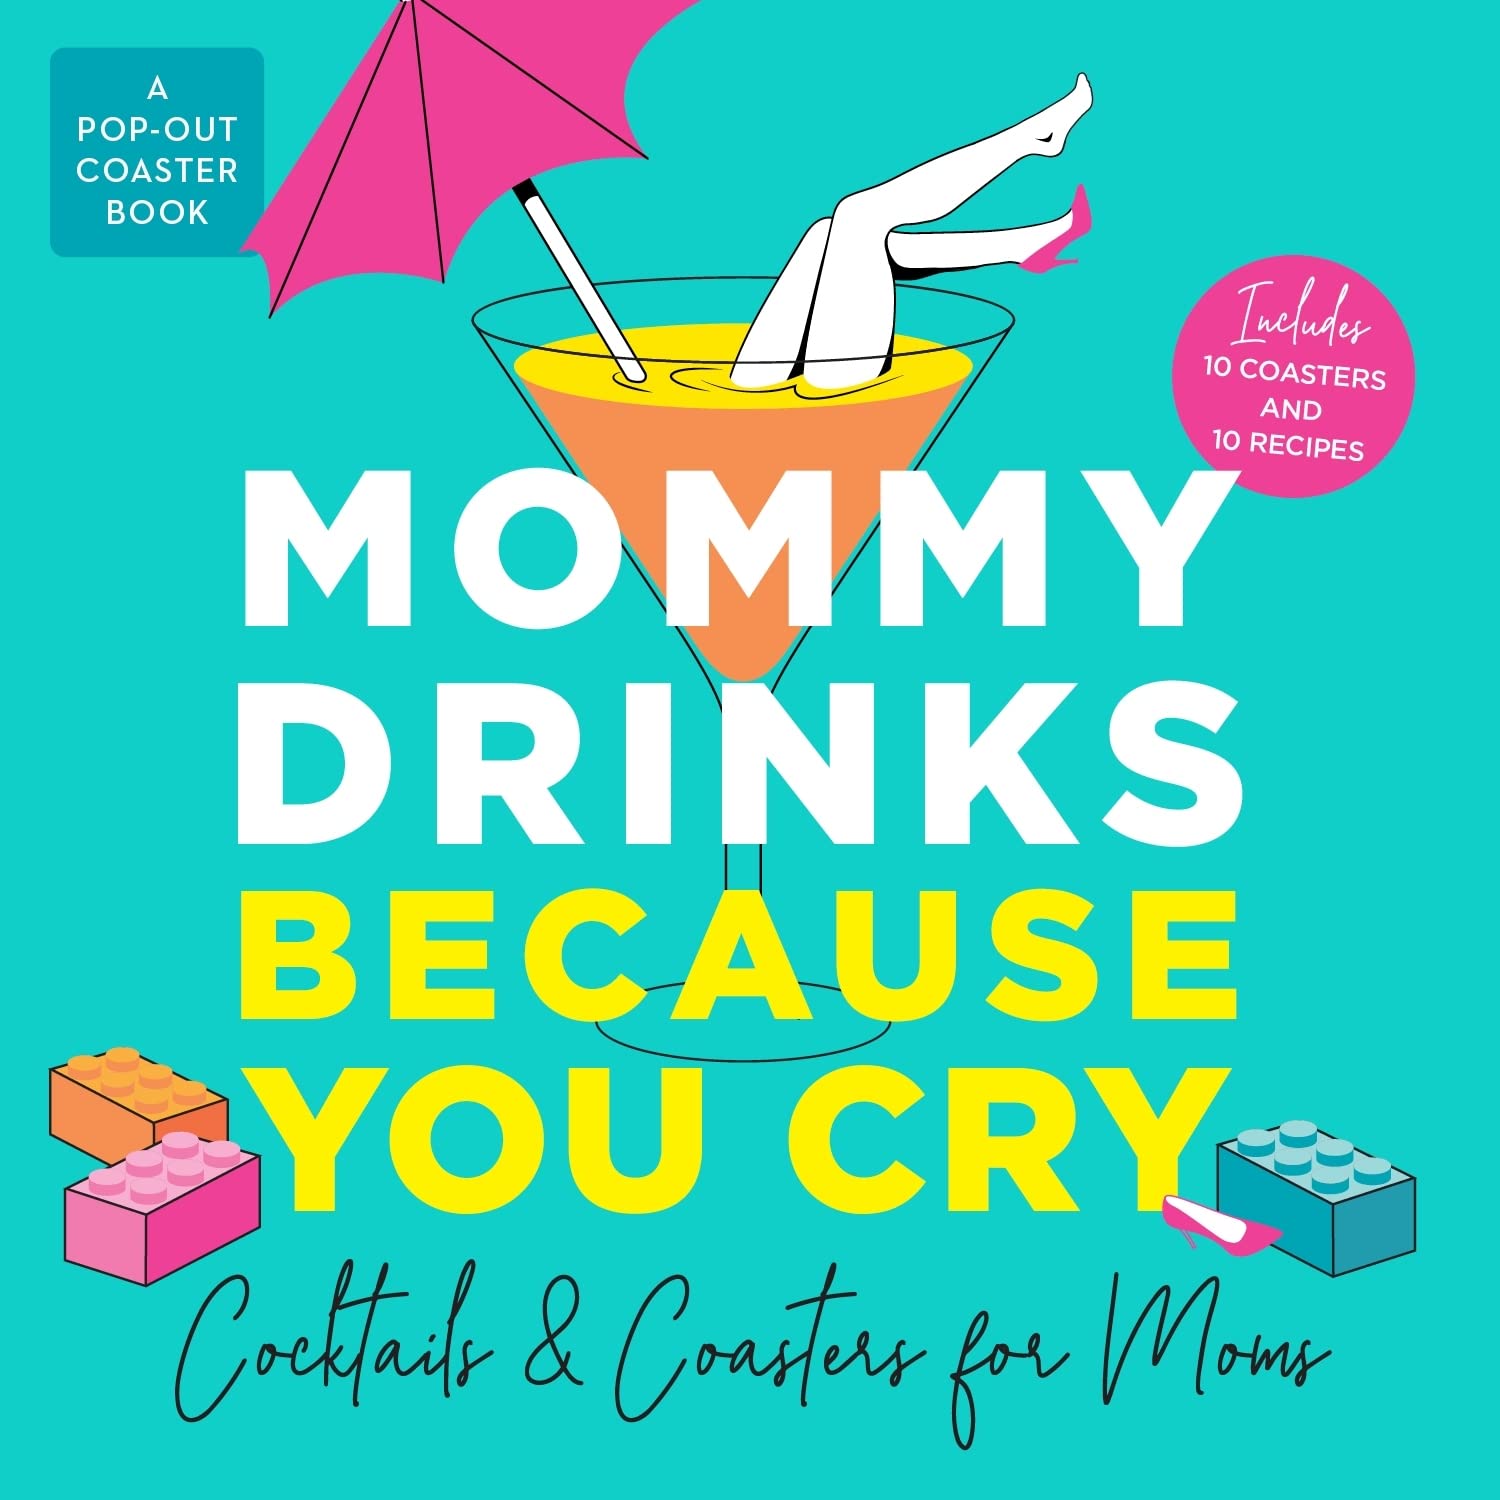 Mommy Drinks Because You Cry: Cocktails and Coasters - Drifts East